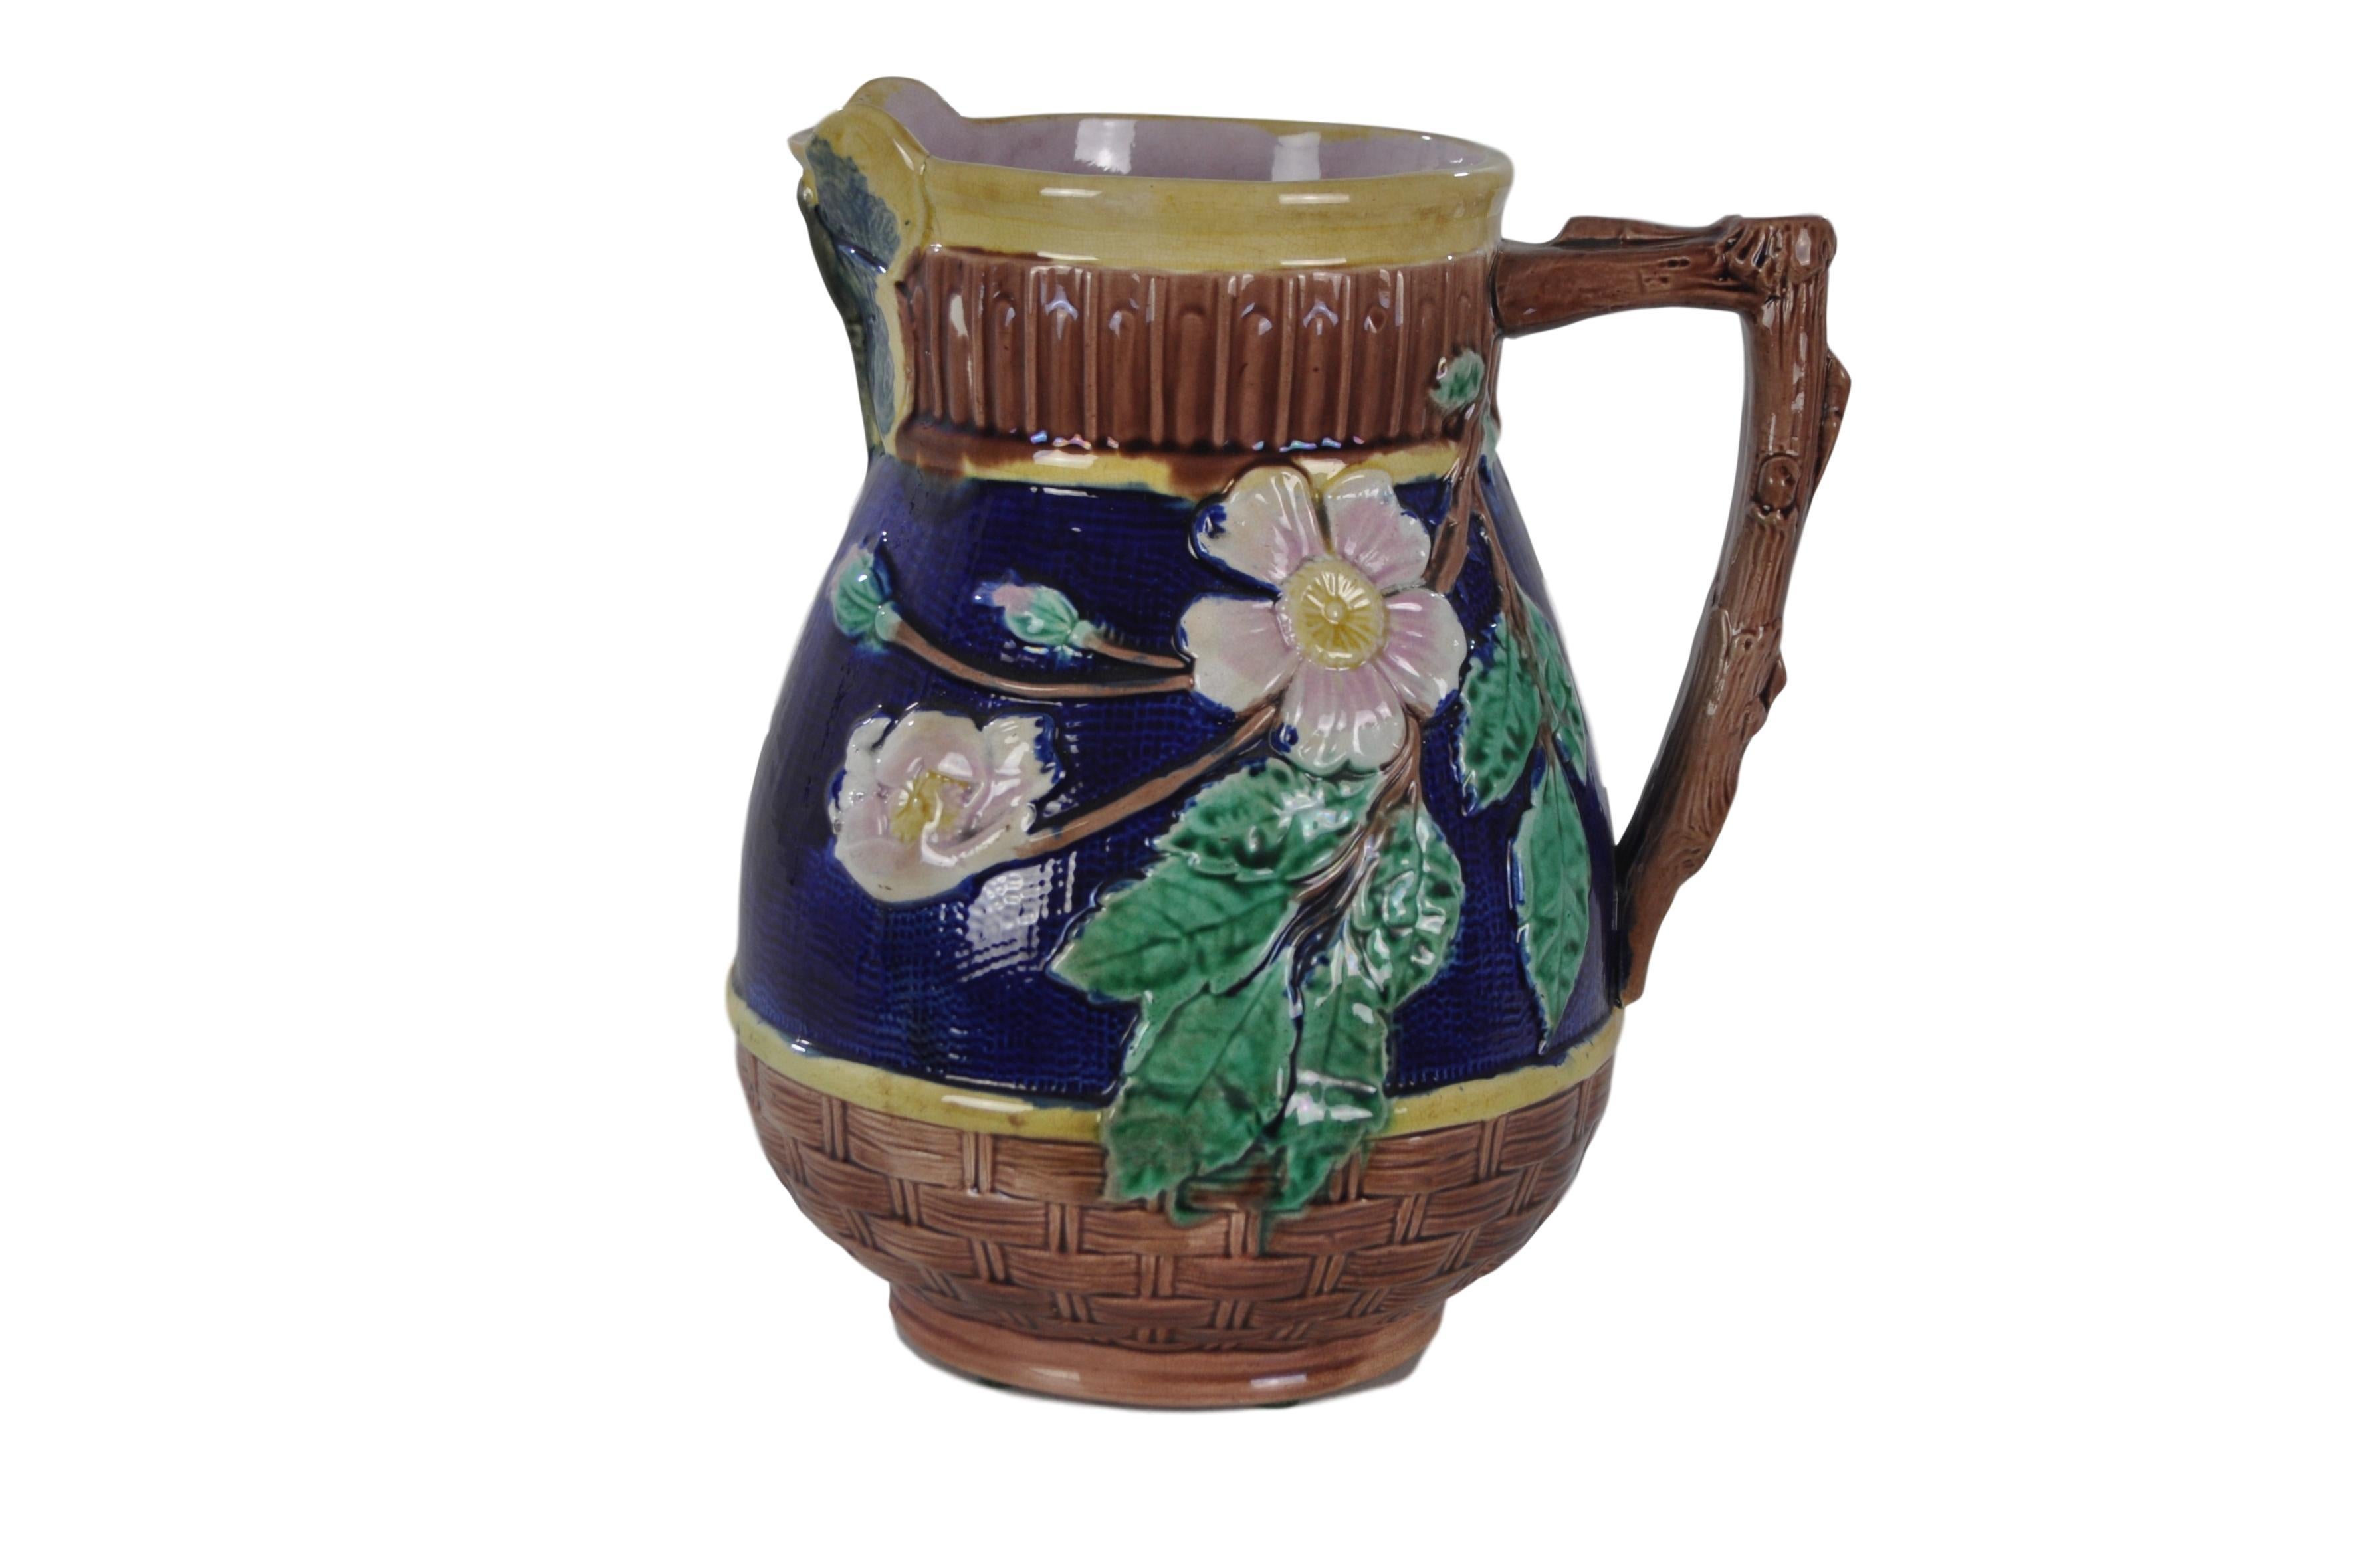 Etruscan majolica dogwood pitcher in bark and vibrant navy with butterfly lip manufactured by Griffen, Smith and Hill of Phoenixville, Pennsylvania, ca. 1885
For over 28 years we have been among the nation's preeminent specialists in fine antique